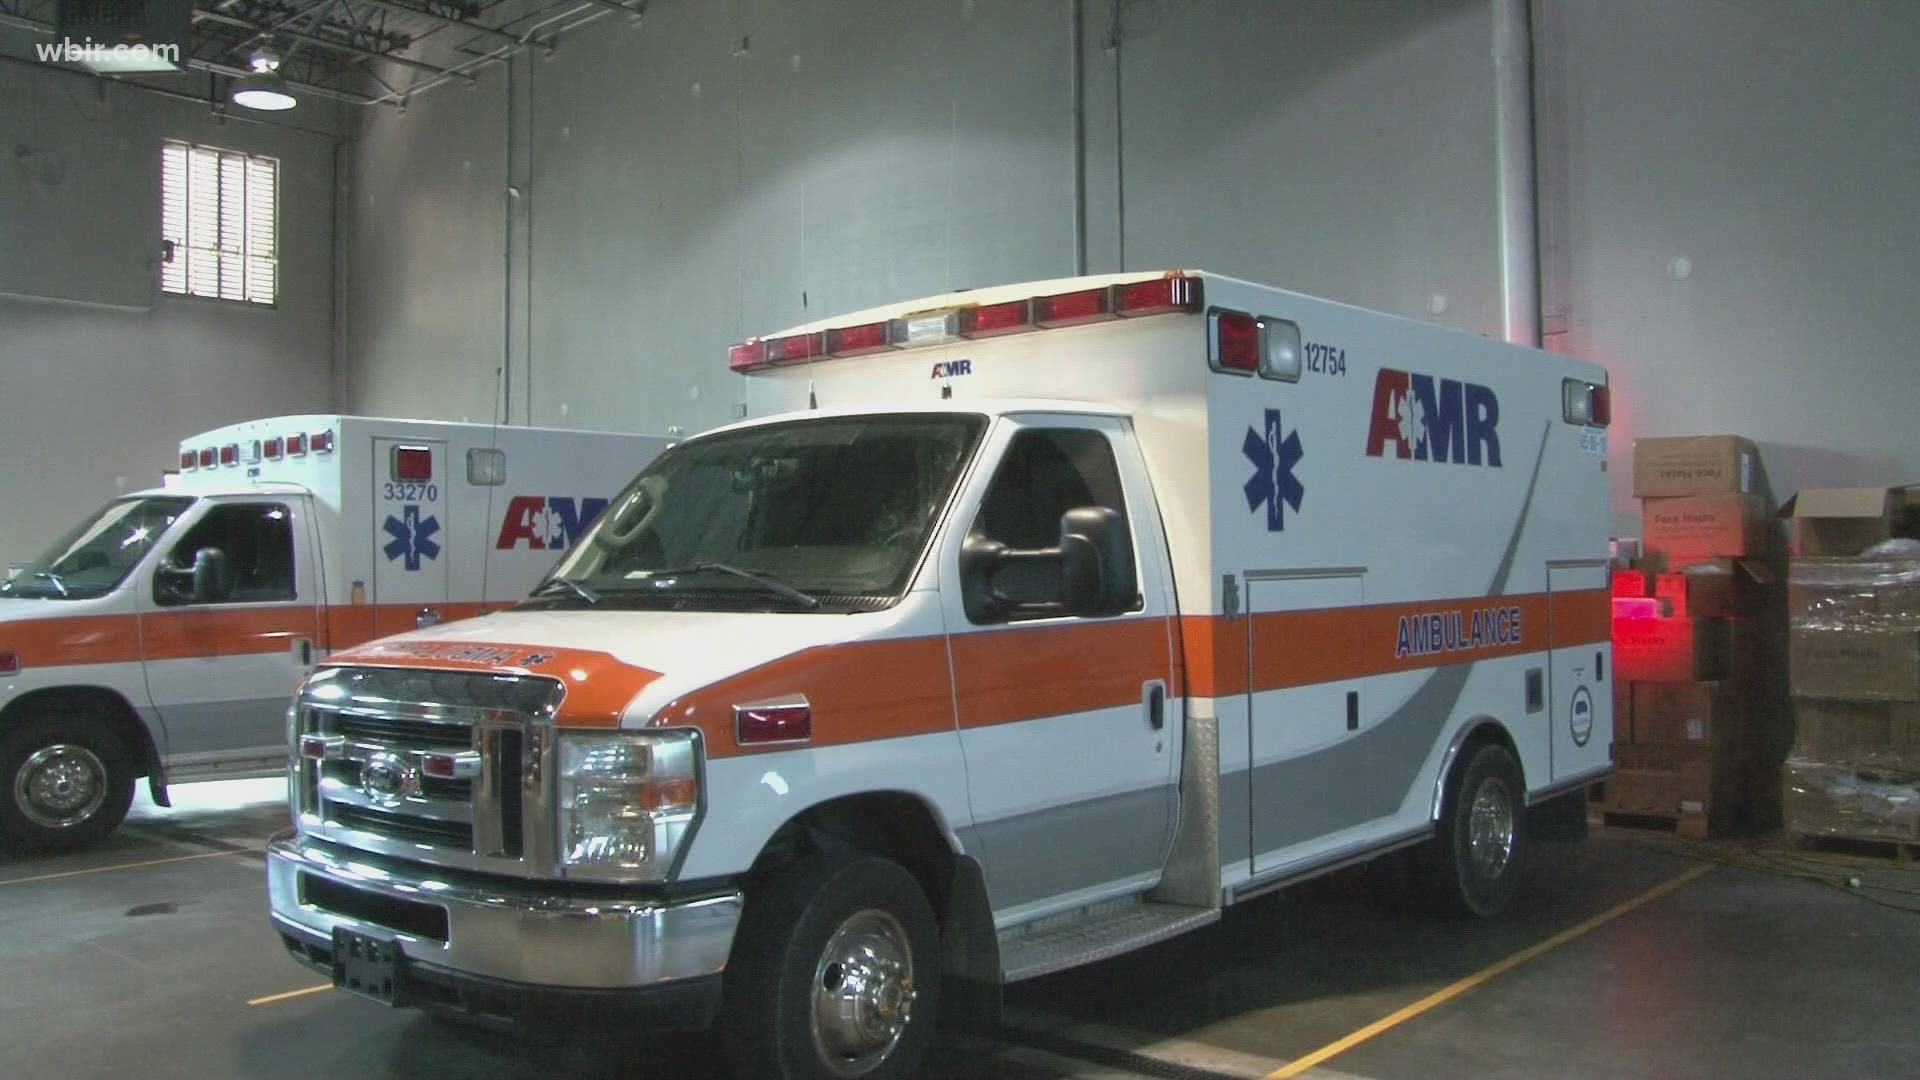 The new pilot program will take effect Aug. 12. Mayor Kincannon called it "the biggest breakthrough in ambulance service in 50 years."